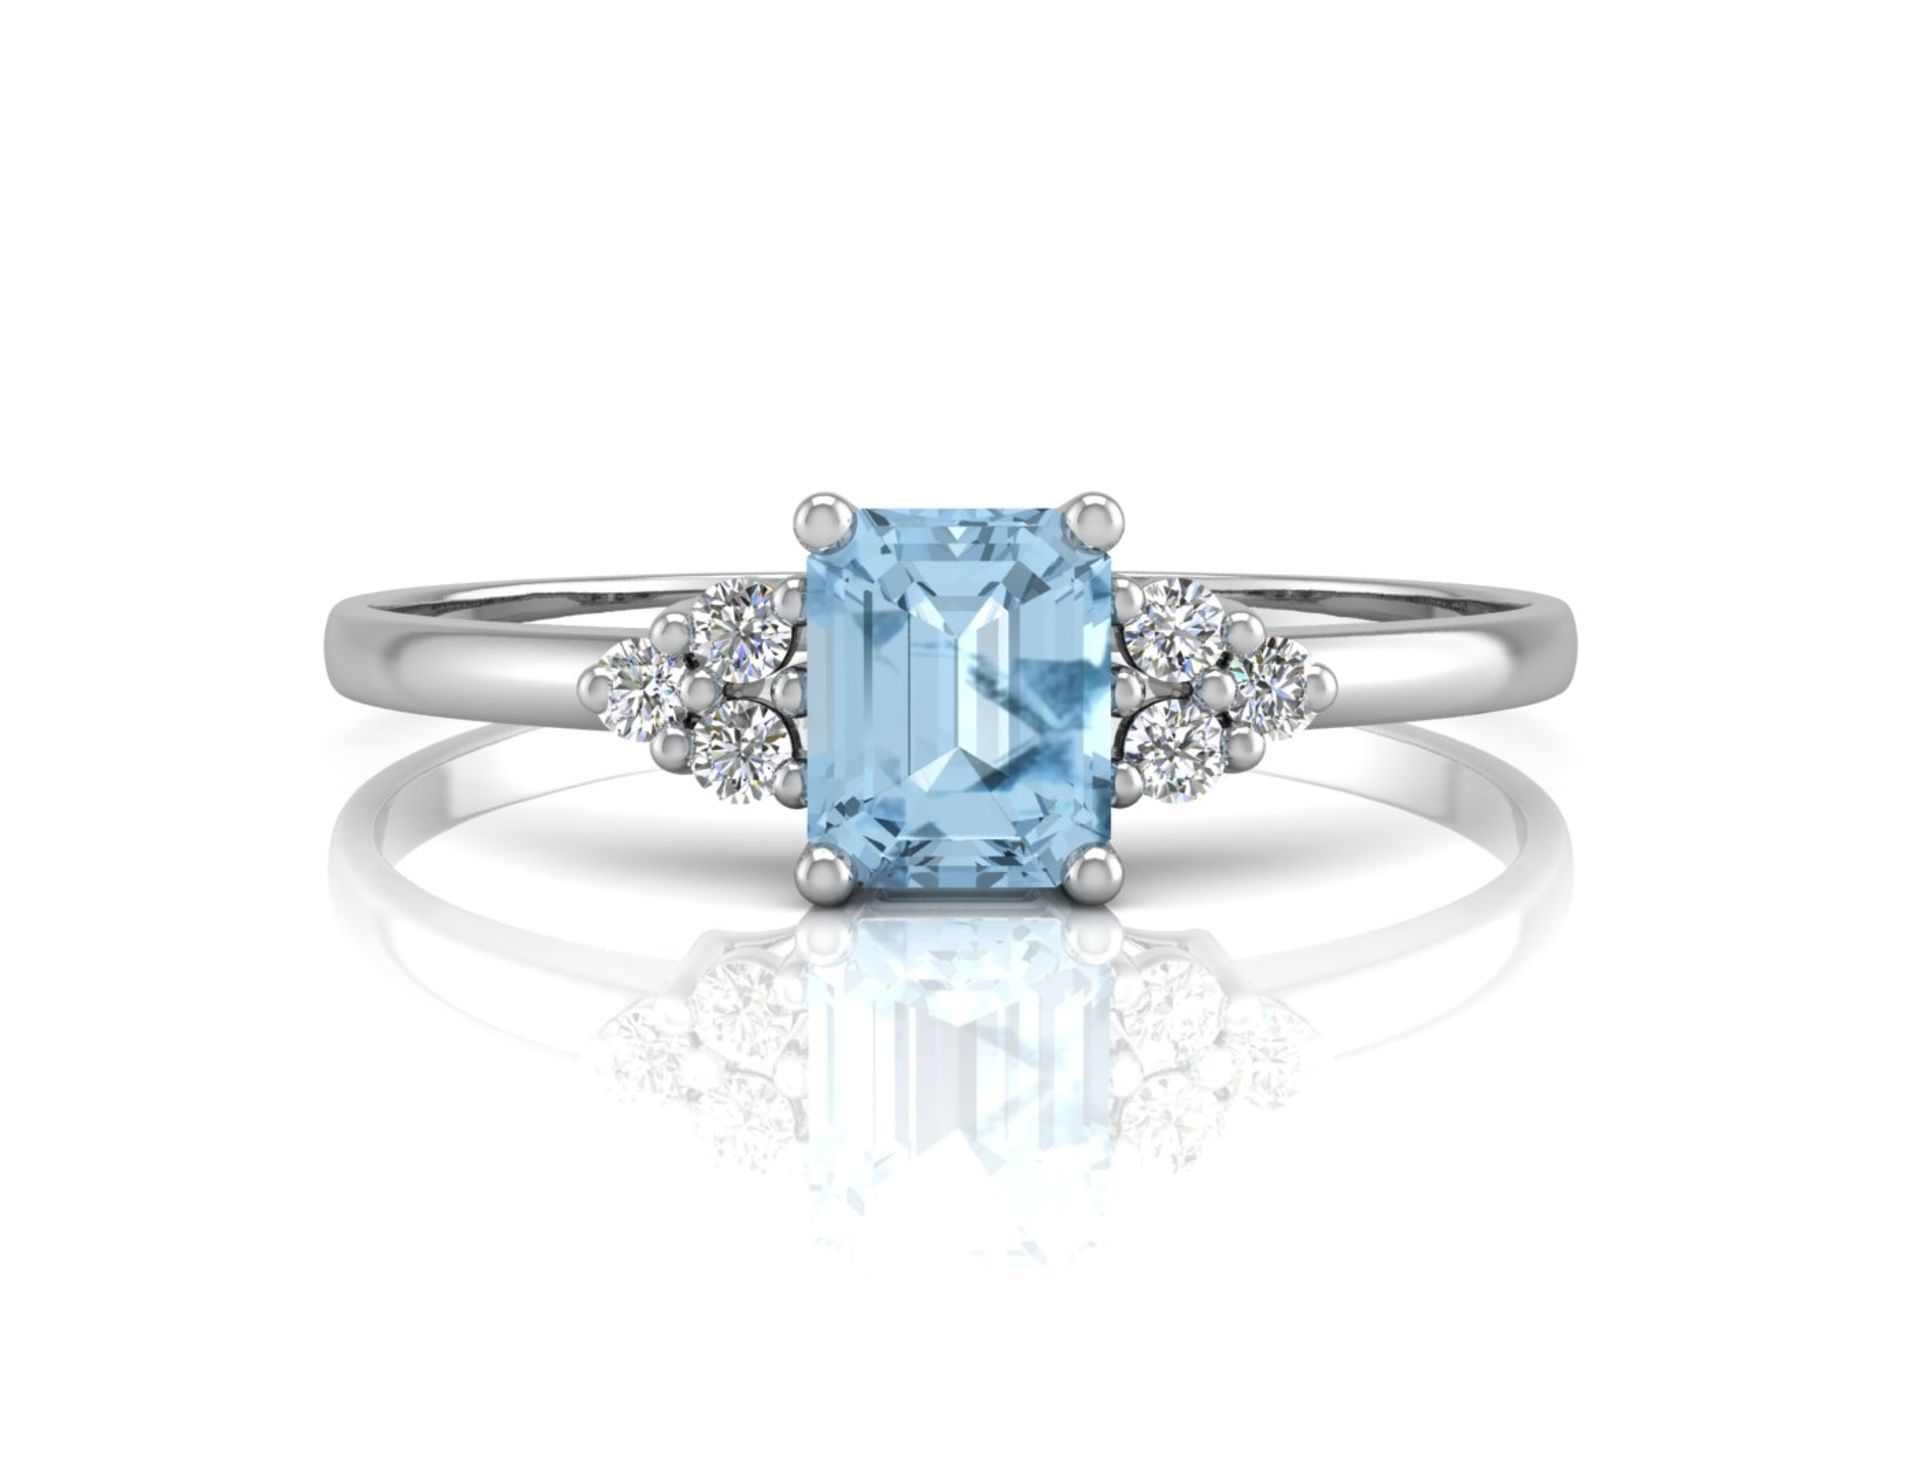 9ct White Gold Fancy Cluster Diamond Blue Topaz Ring 0.06 Carats - Valued by GIE £1,075.00 - An - Image 4 of 5